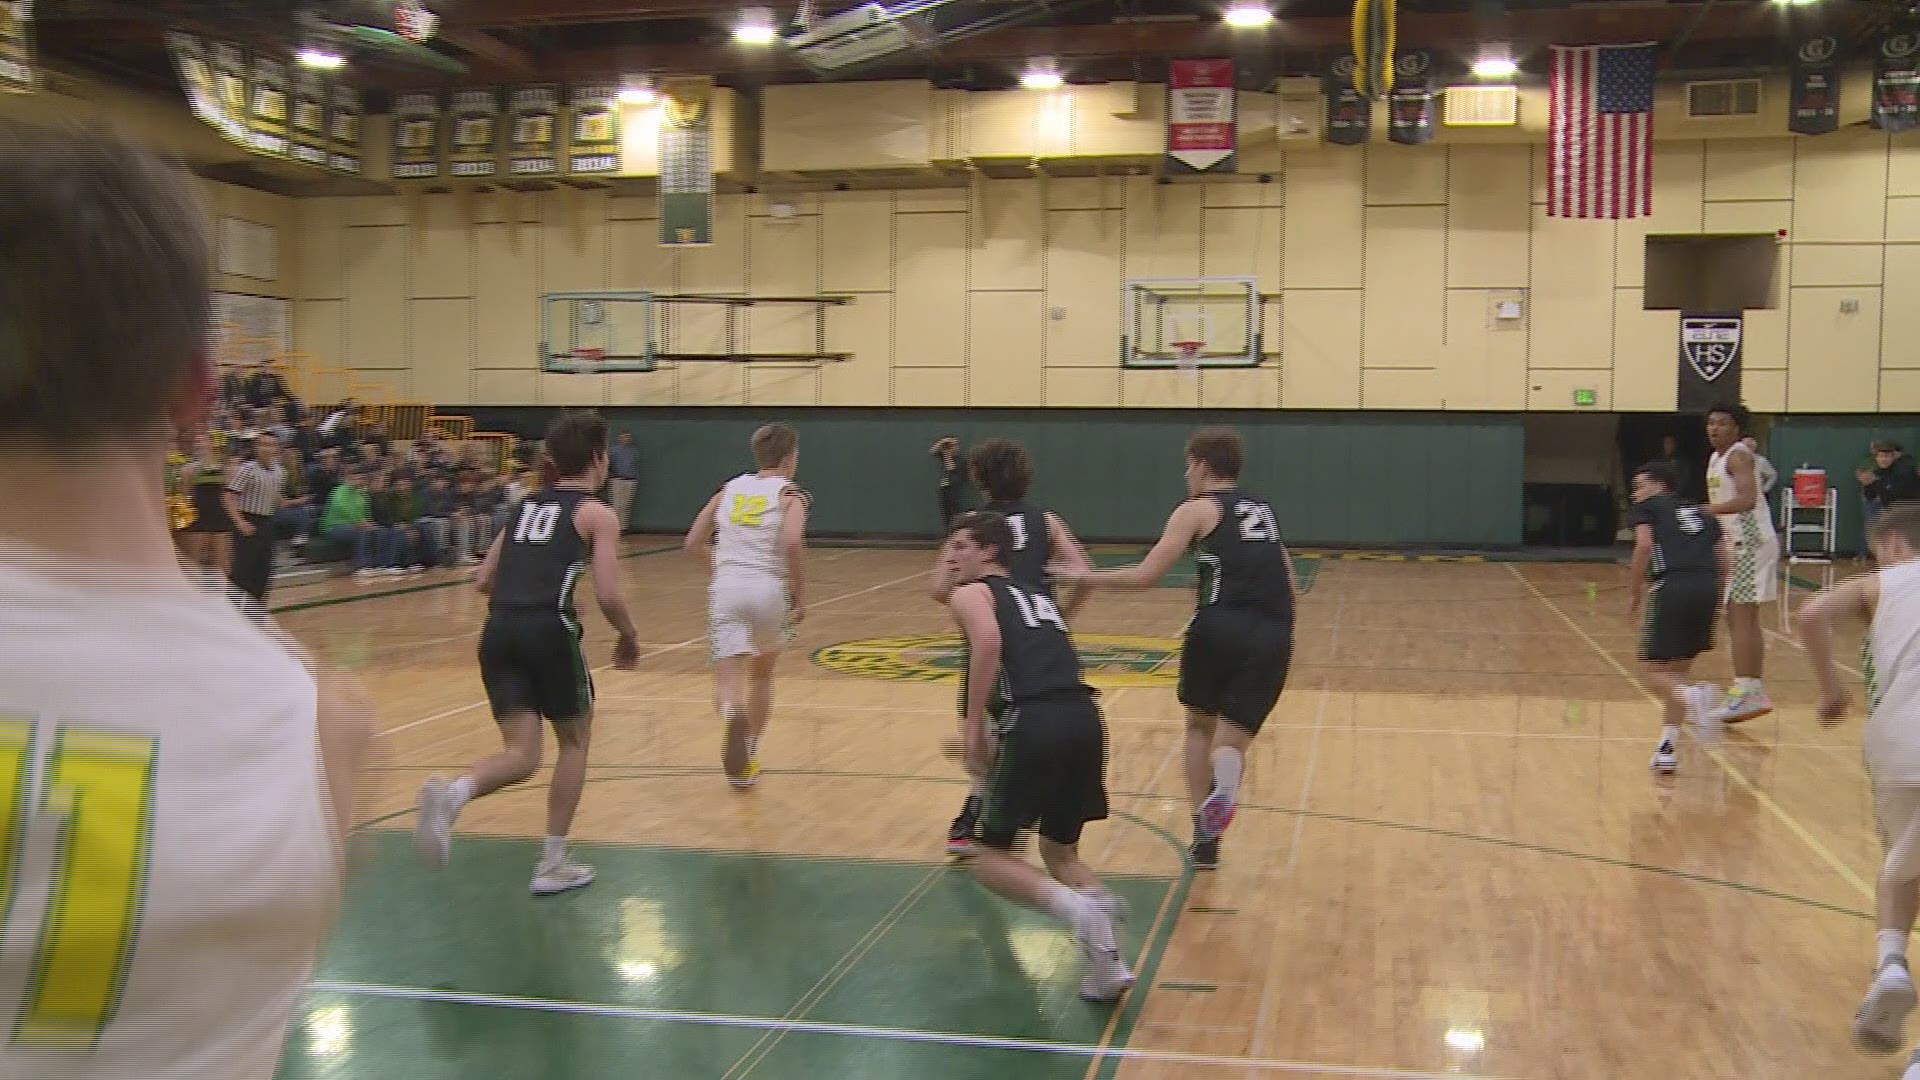 Highlights from No. 7 West Linn's 95-64 win over No. 3 Tigard on Jan. 17, 2020. Highlights are part of KGW's Friday Night Hoops with Orlando Sanchez.